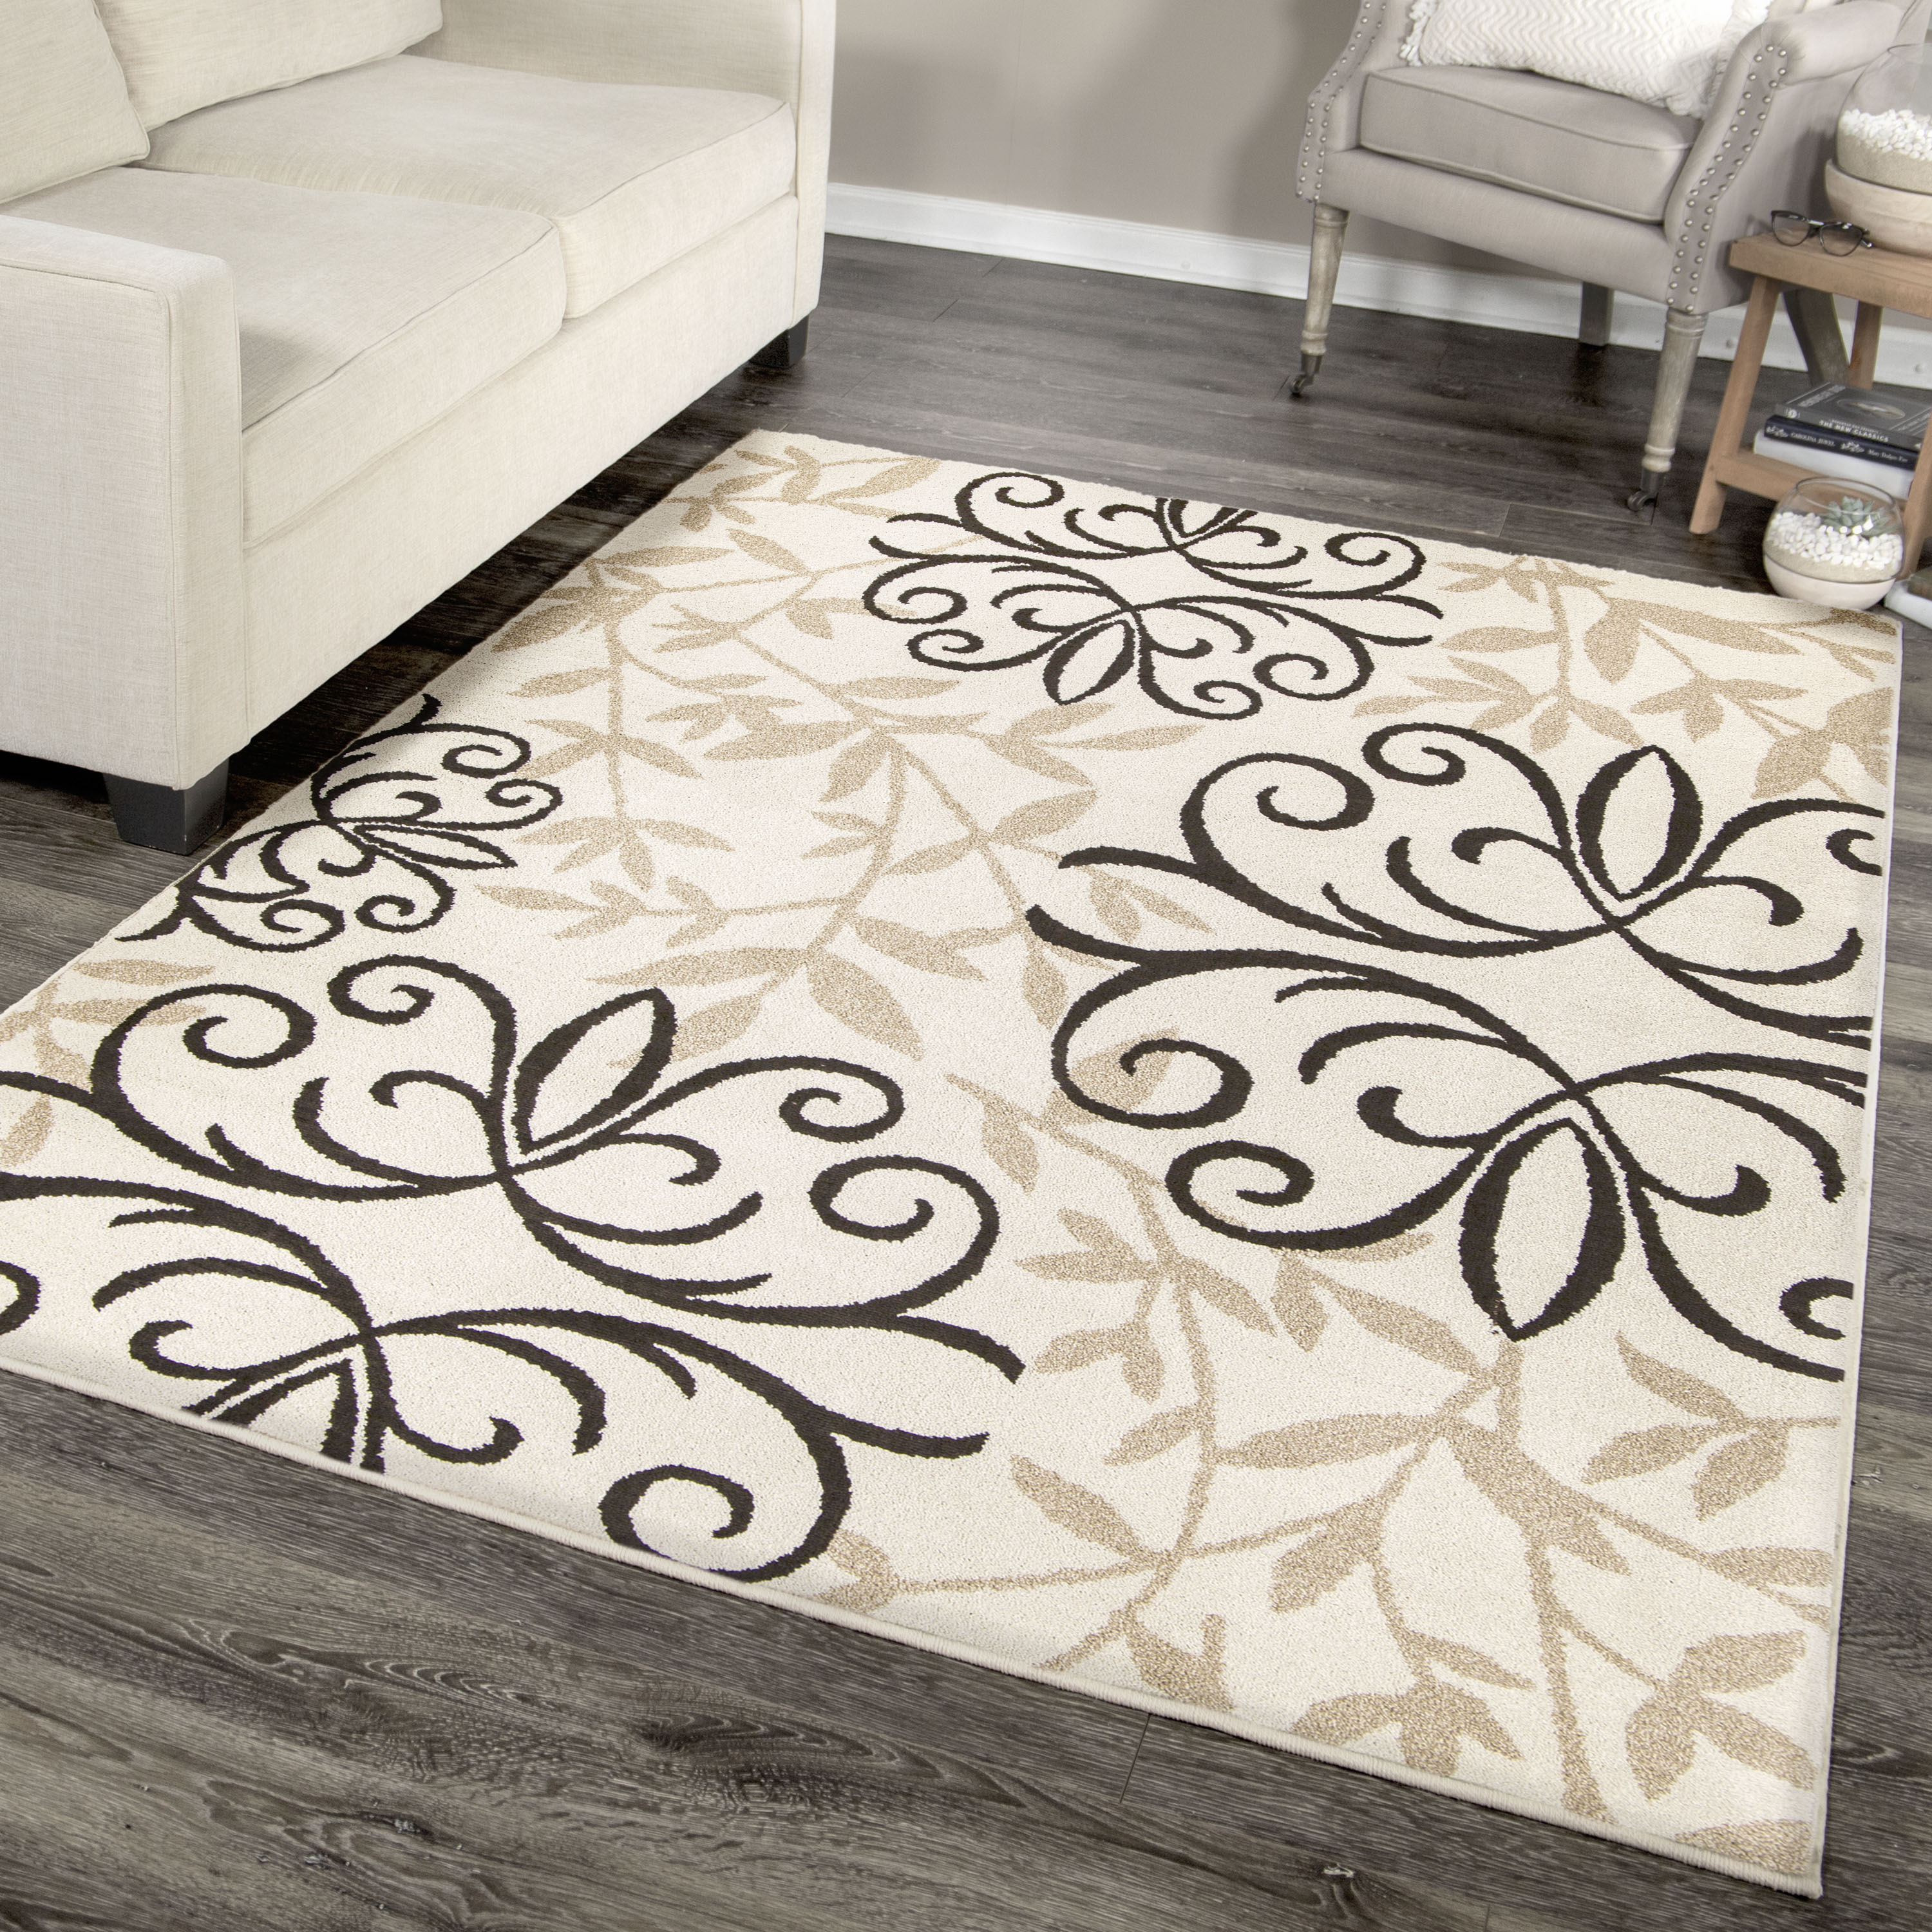 Better Homes & Gardens Iron Fleur 7'6" X 9'6" Off White Floral Rug - image 1 of 7